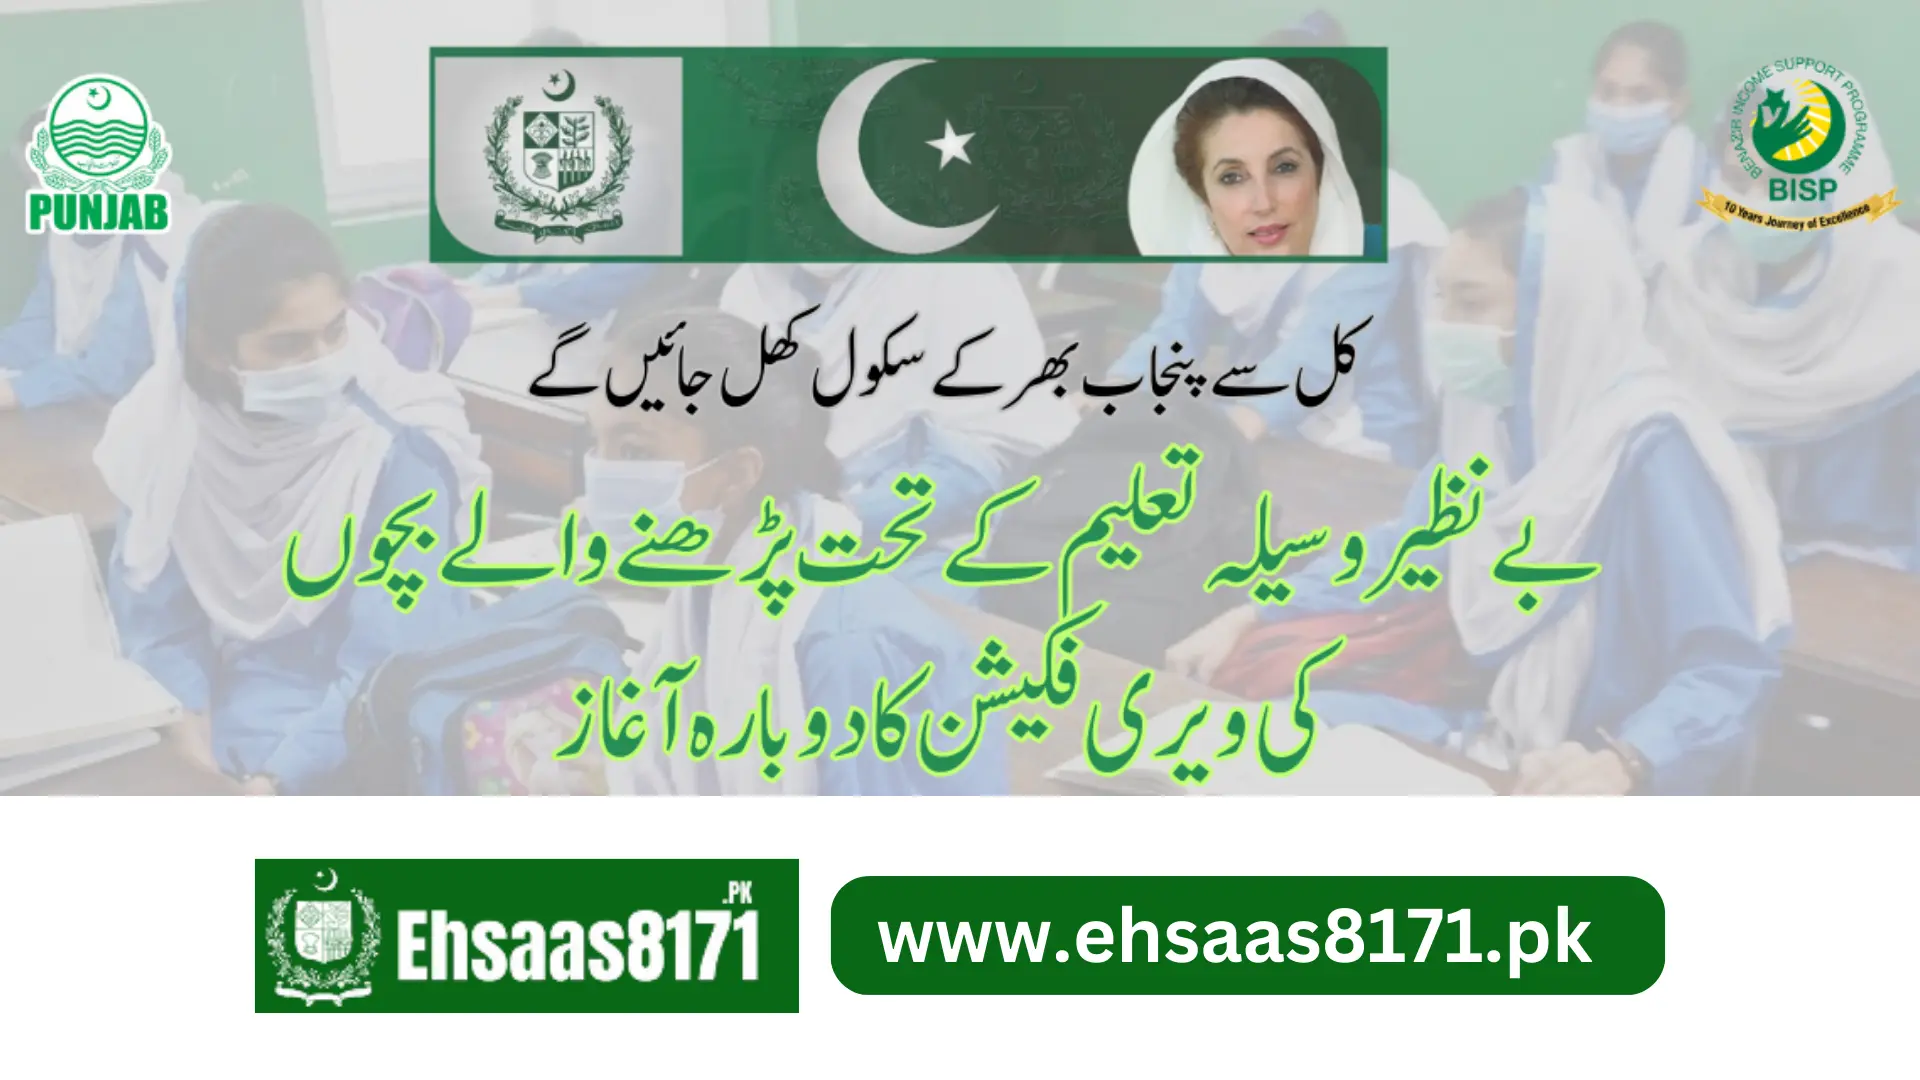 All School Reopen And BISP Student Verification